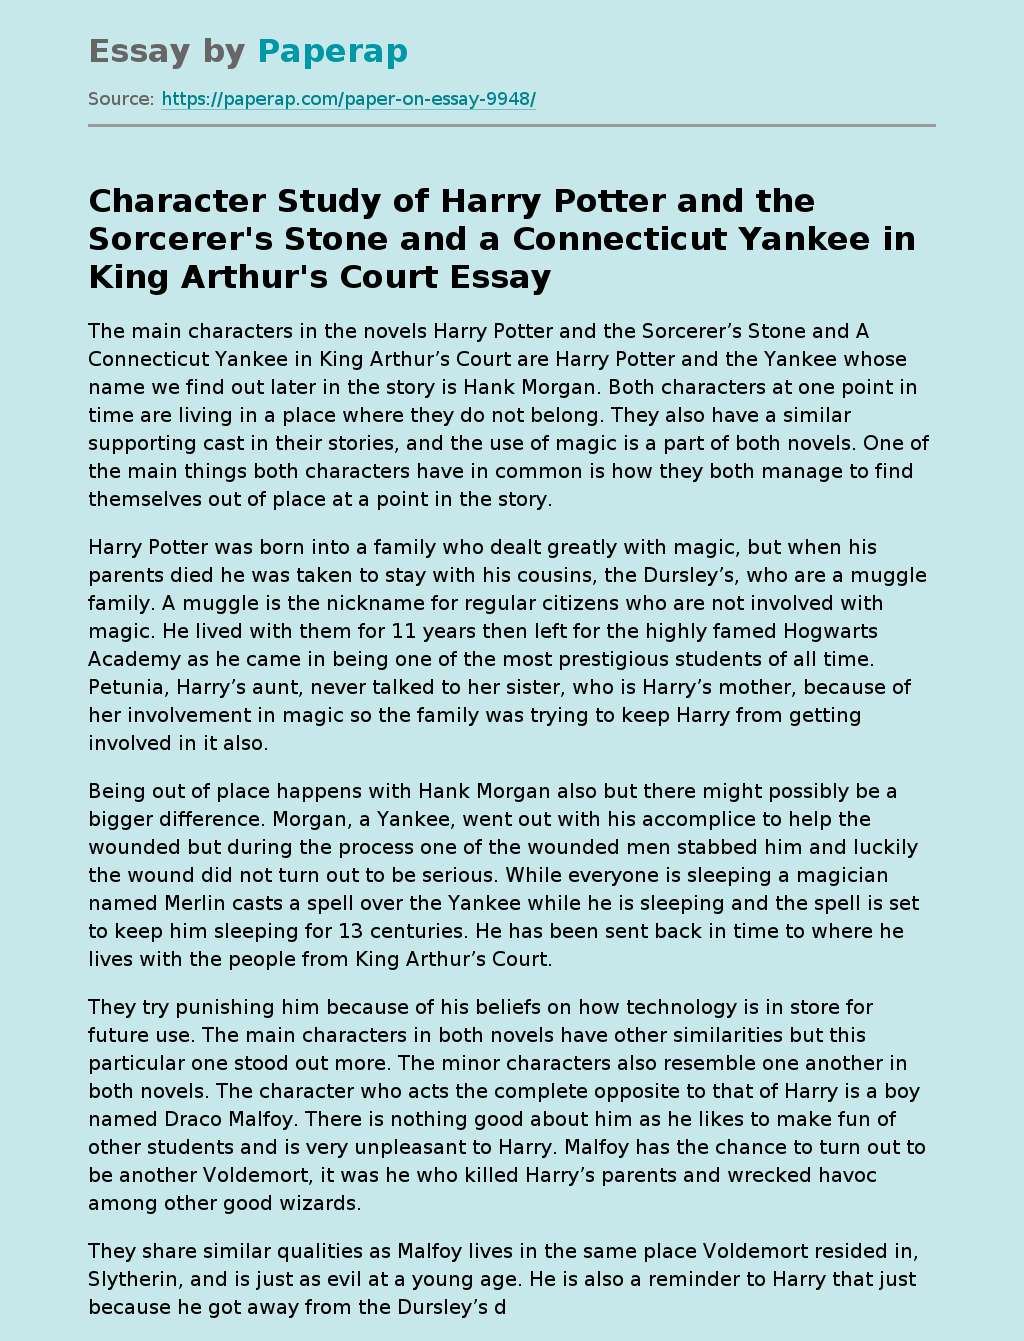 Character Study of "Harry Potter and the Sorcerer's Stone" and "A Connecticut Yankee in King Arthur's Court"